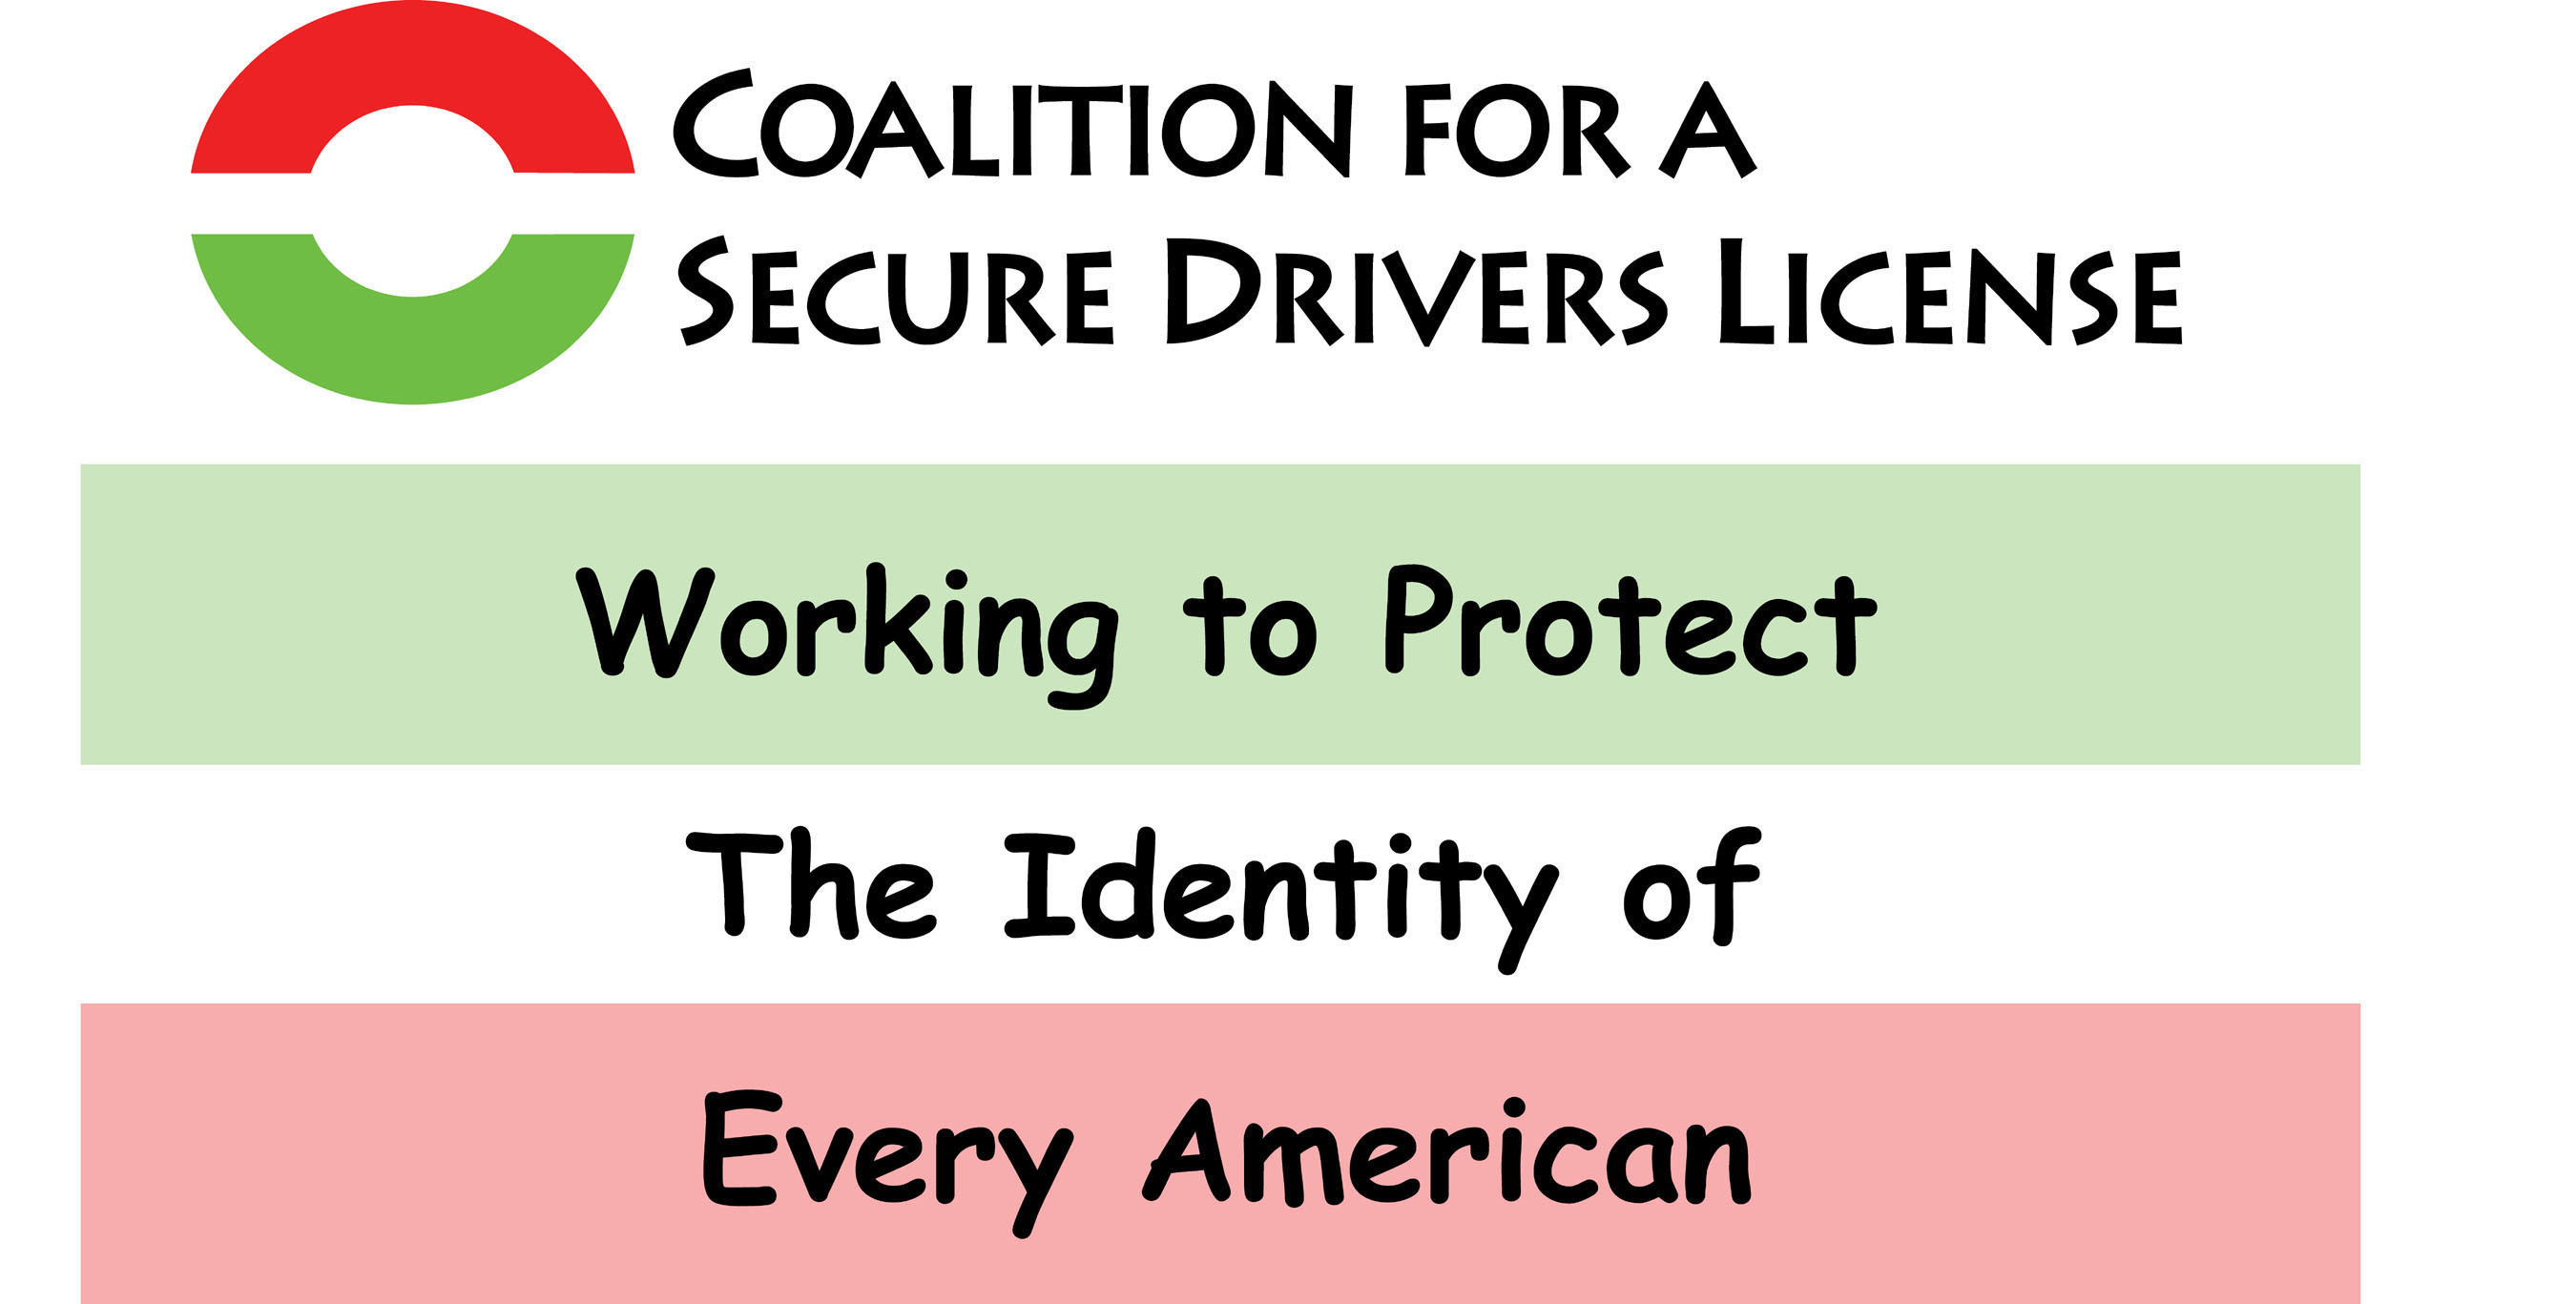 coalition for a secure driver's license